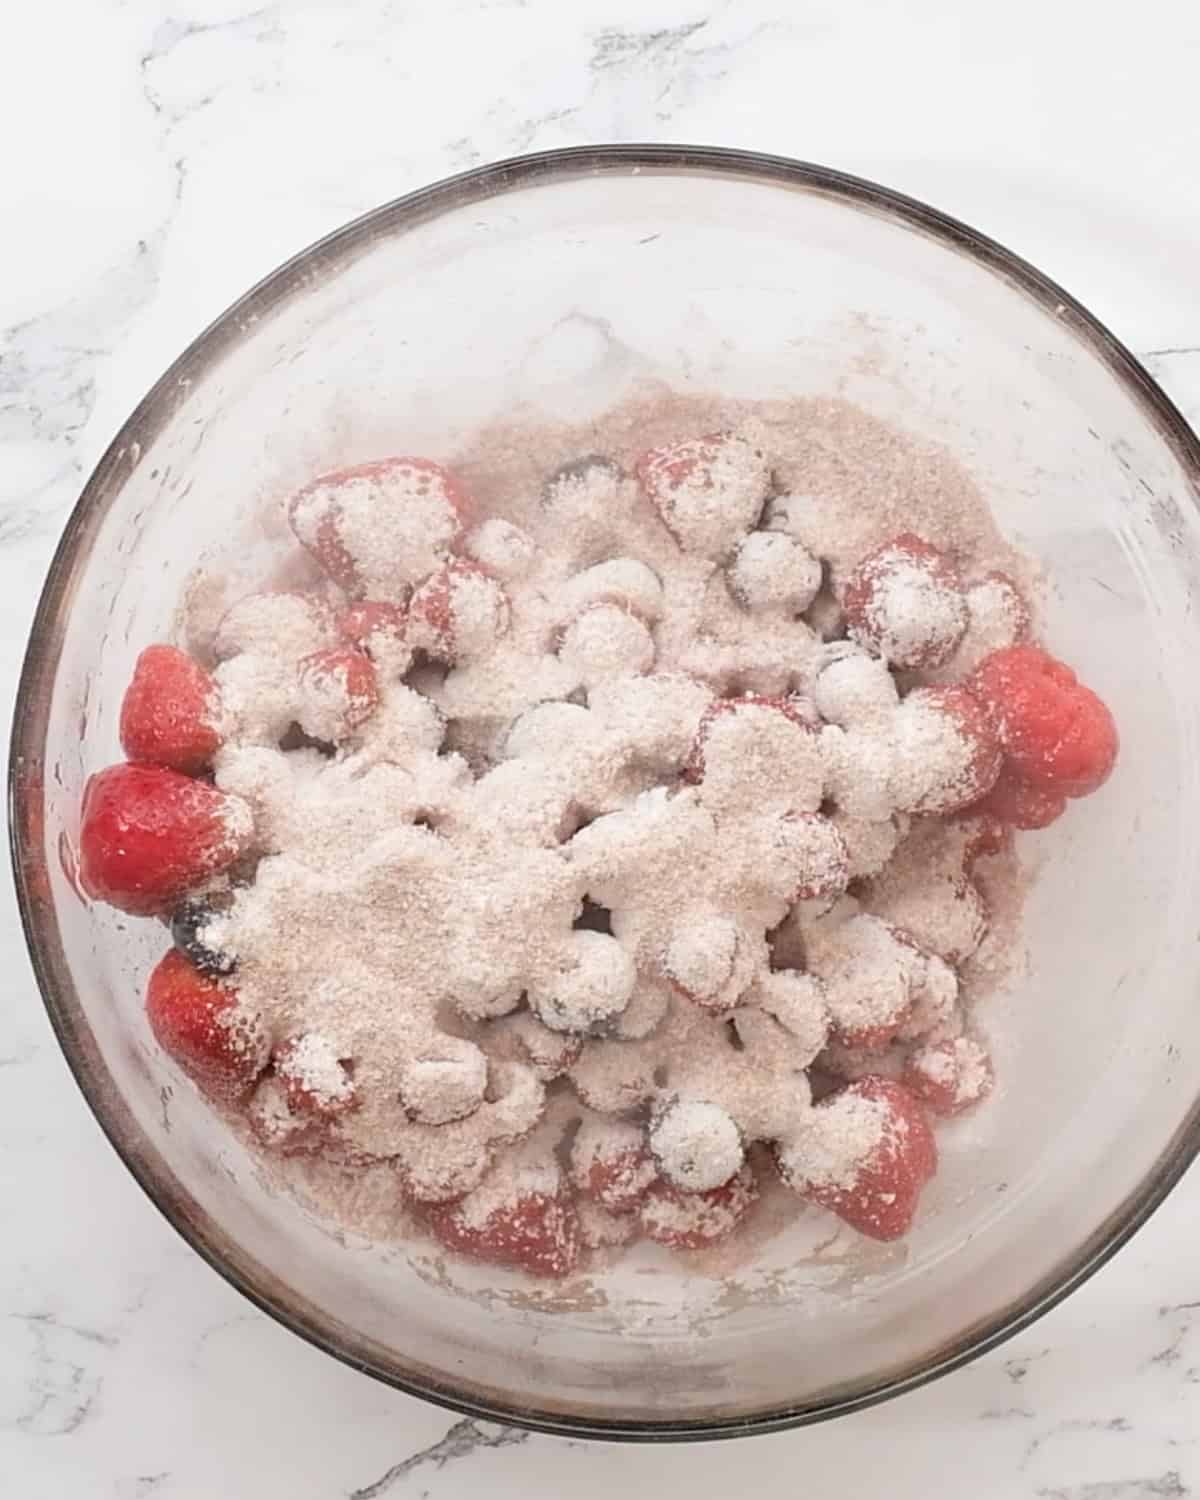 How to Make Healthy Berry Crisp -  dry ingredients added before mixing